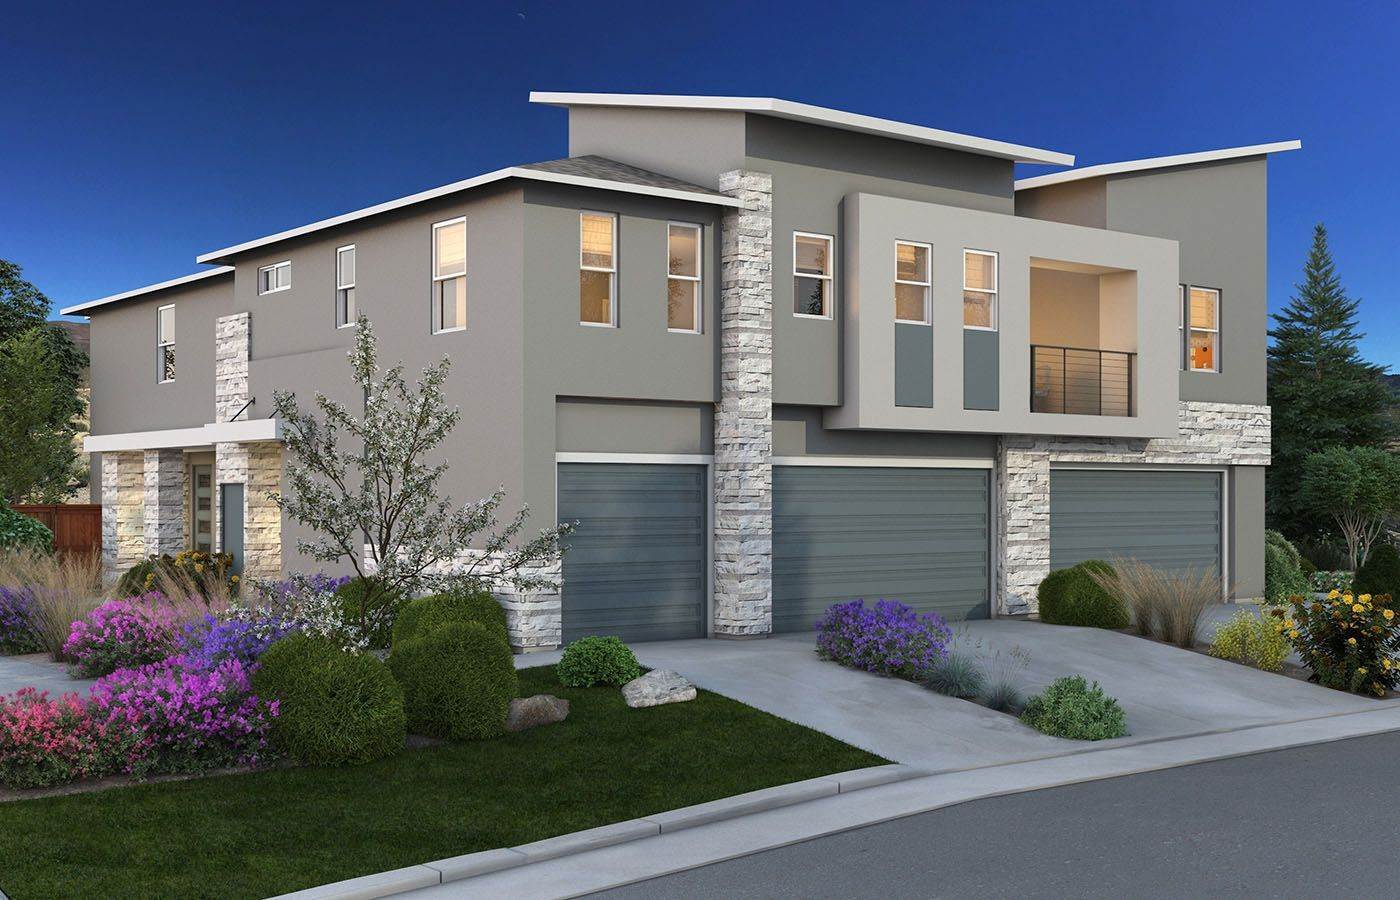 5. Village South at Valley Knolls building at 299 Radiant Drive, Carson City, NV 89705